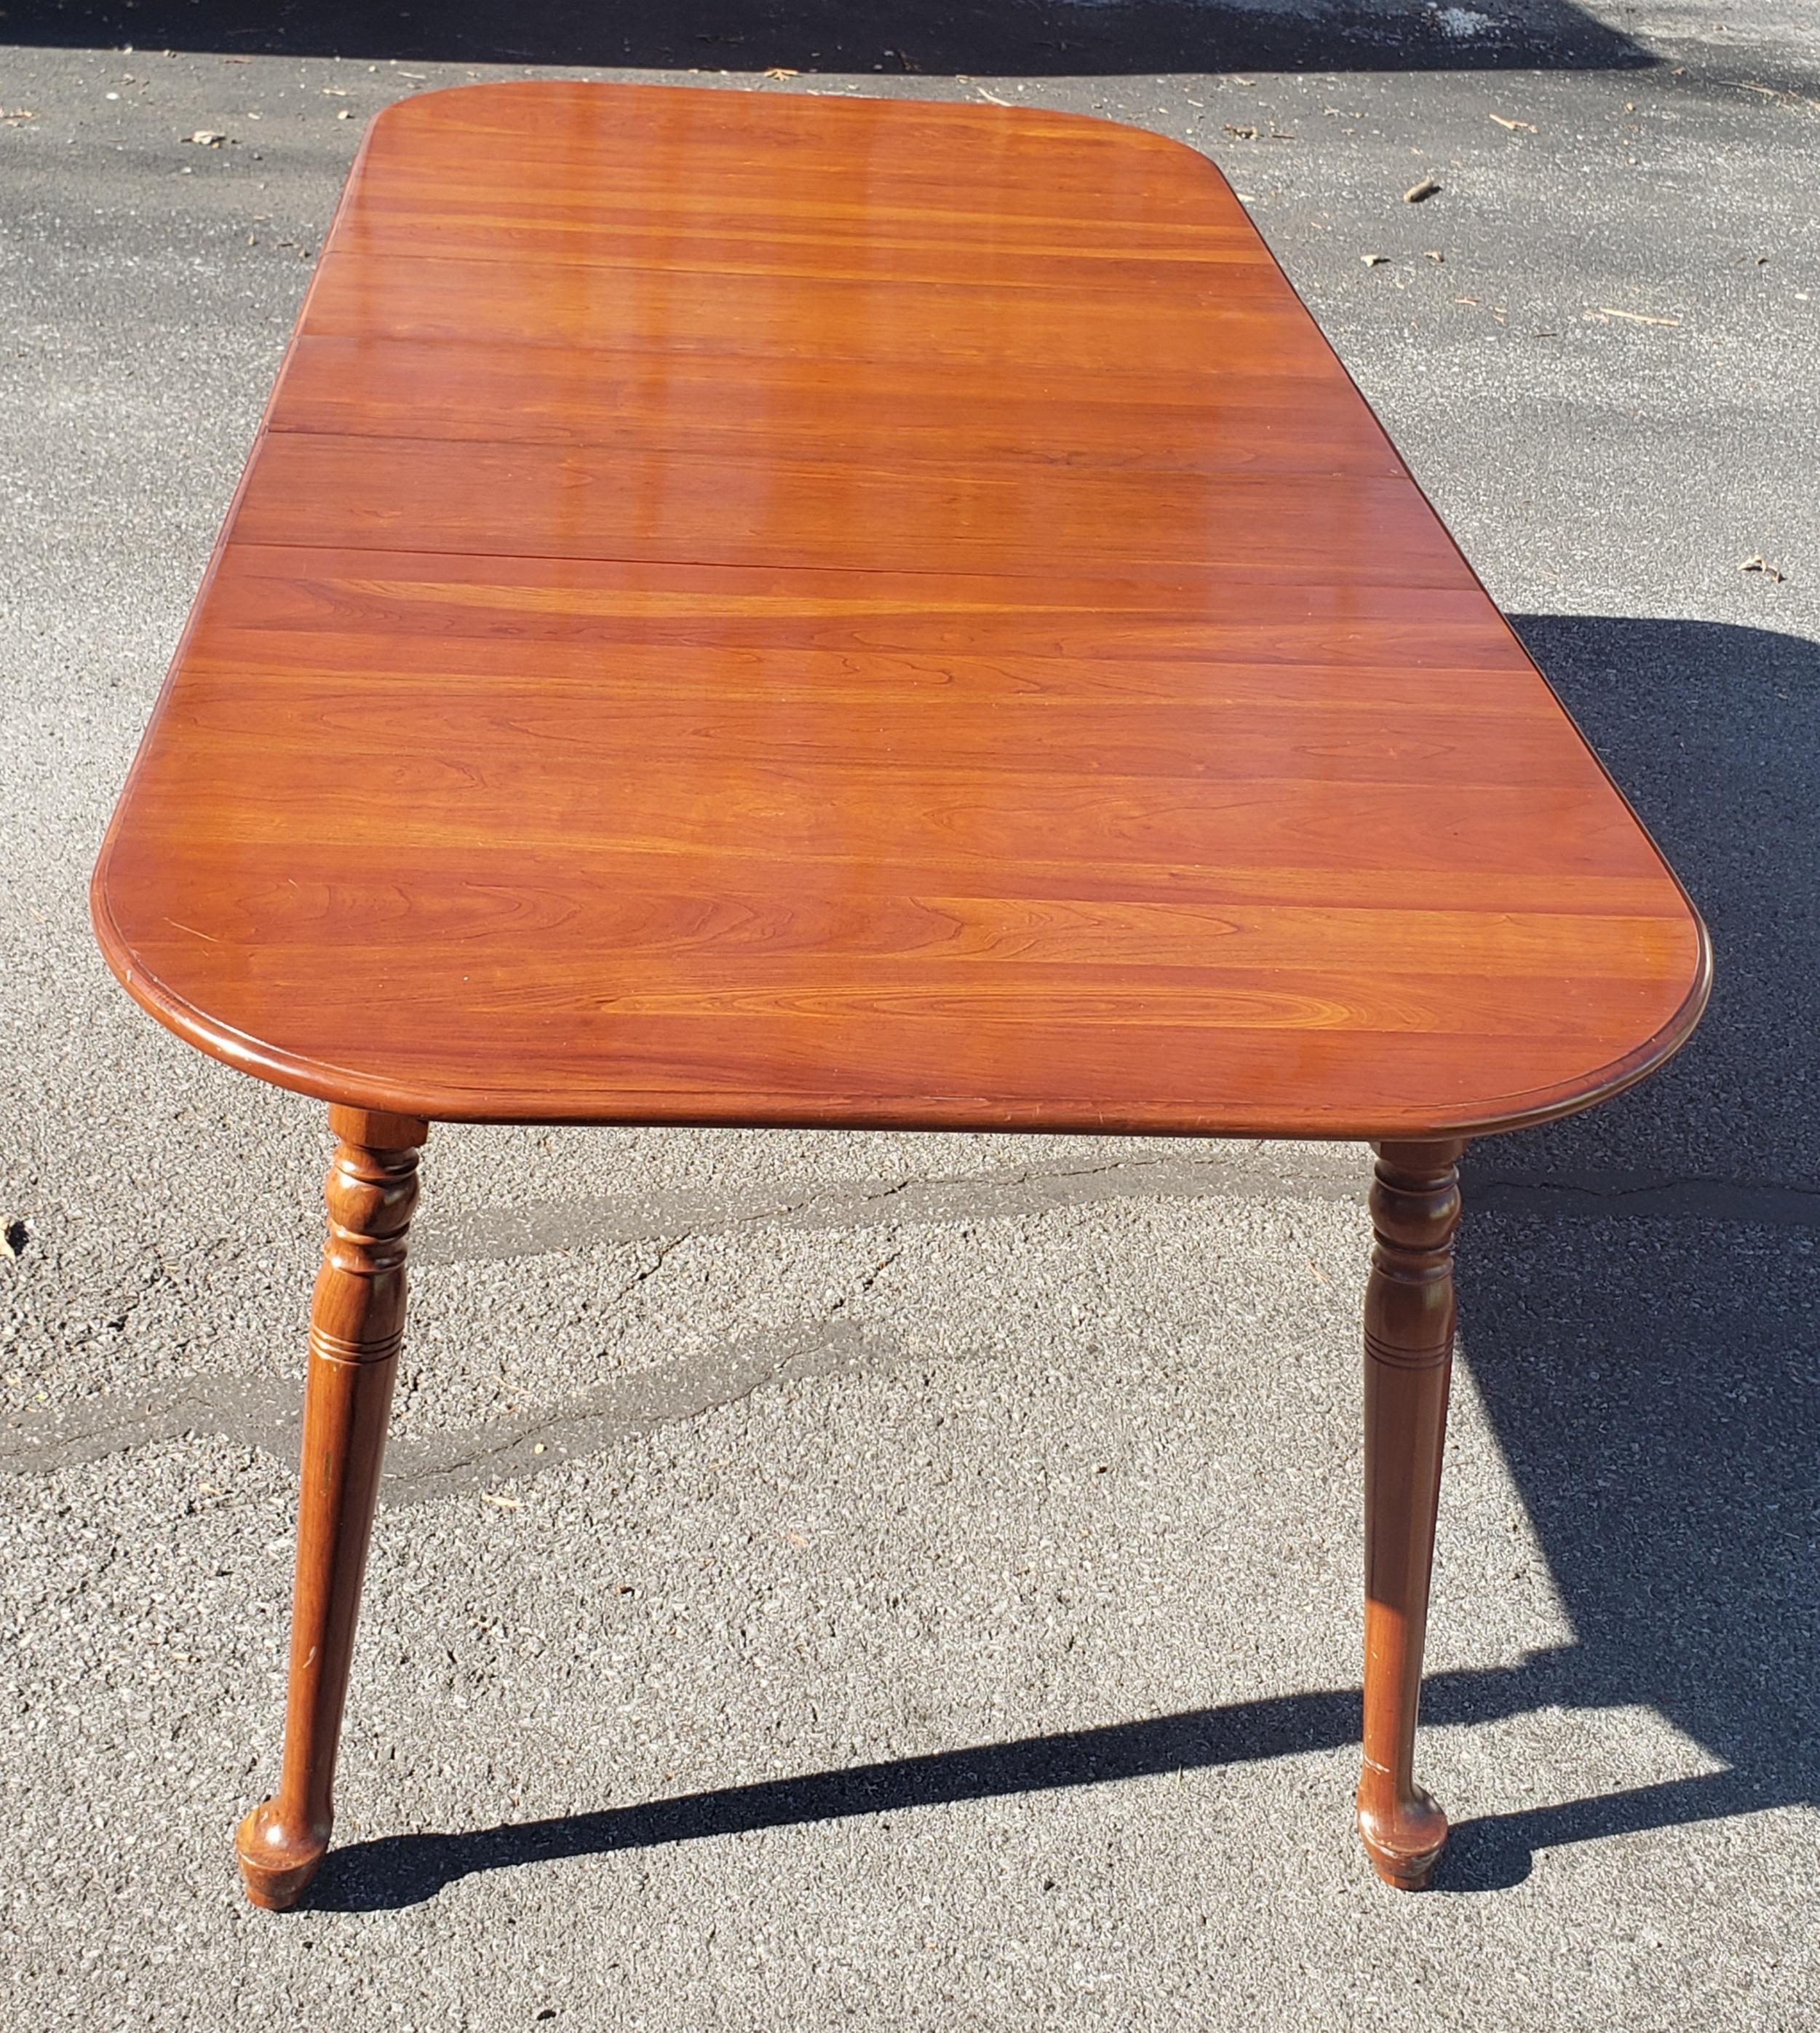 Pennsylvania House American Classical Cherry Extention Dining Table with Pads In Good Condition For Sale In Germantown, MD